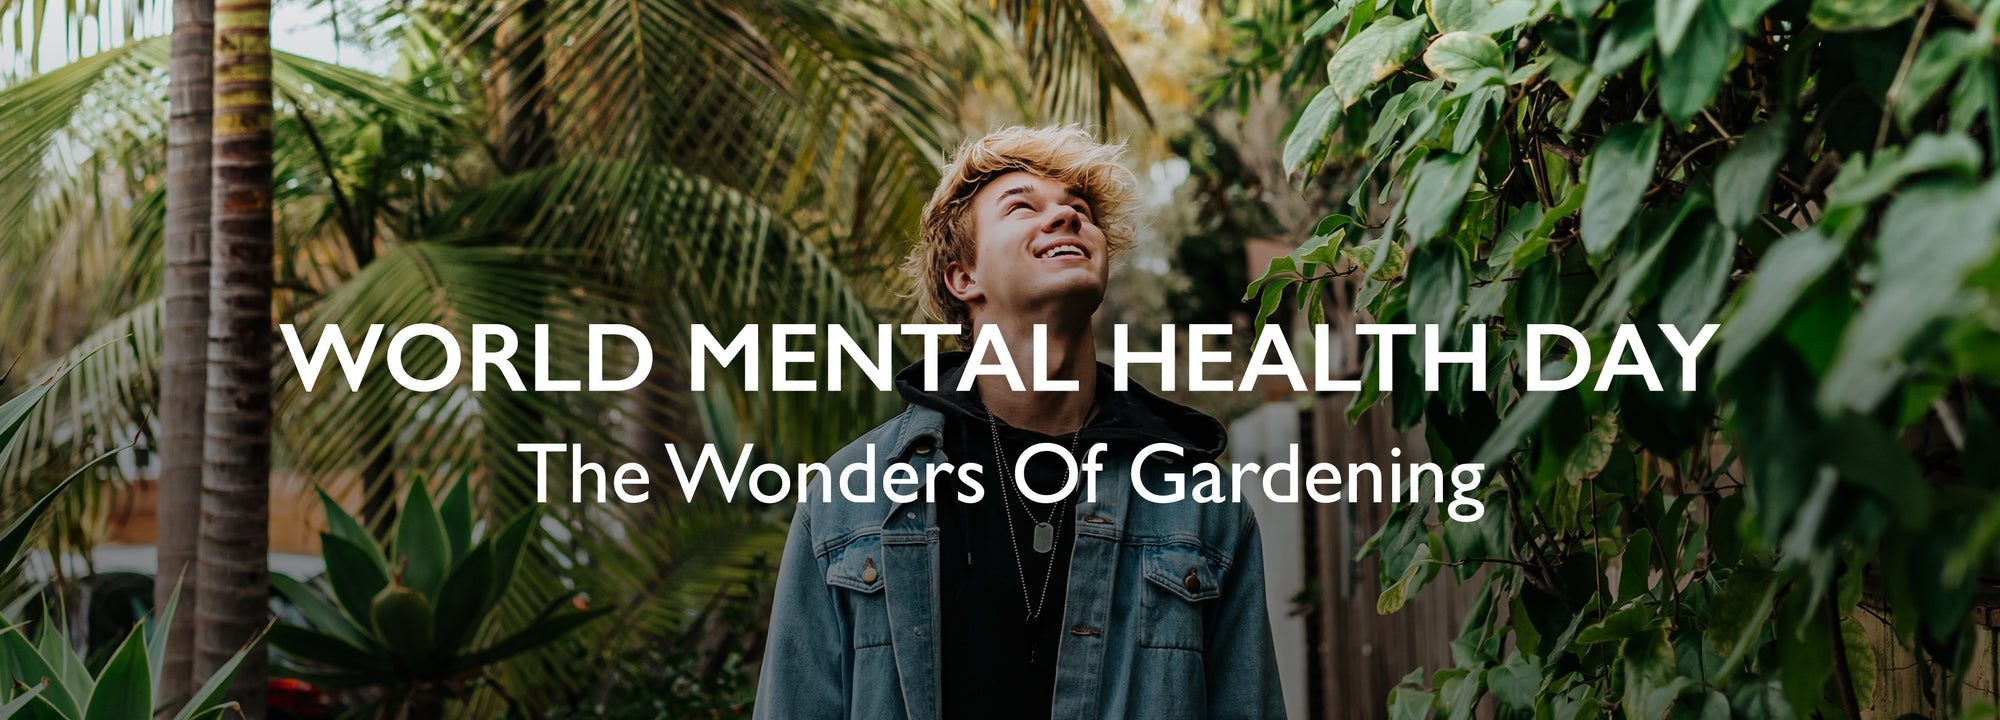 Cultivating Wellness on World Mental Health Day